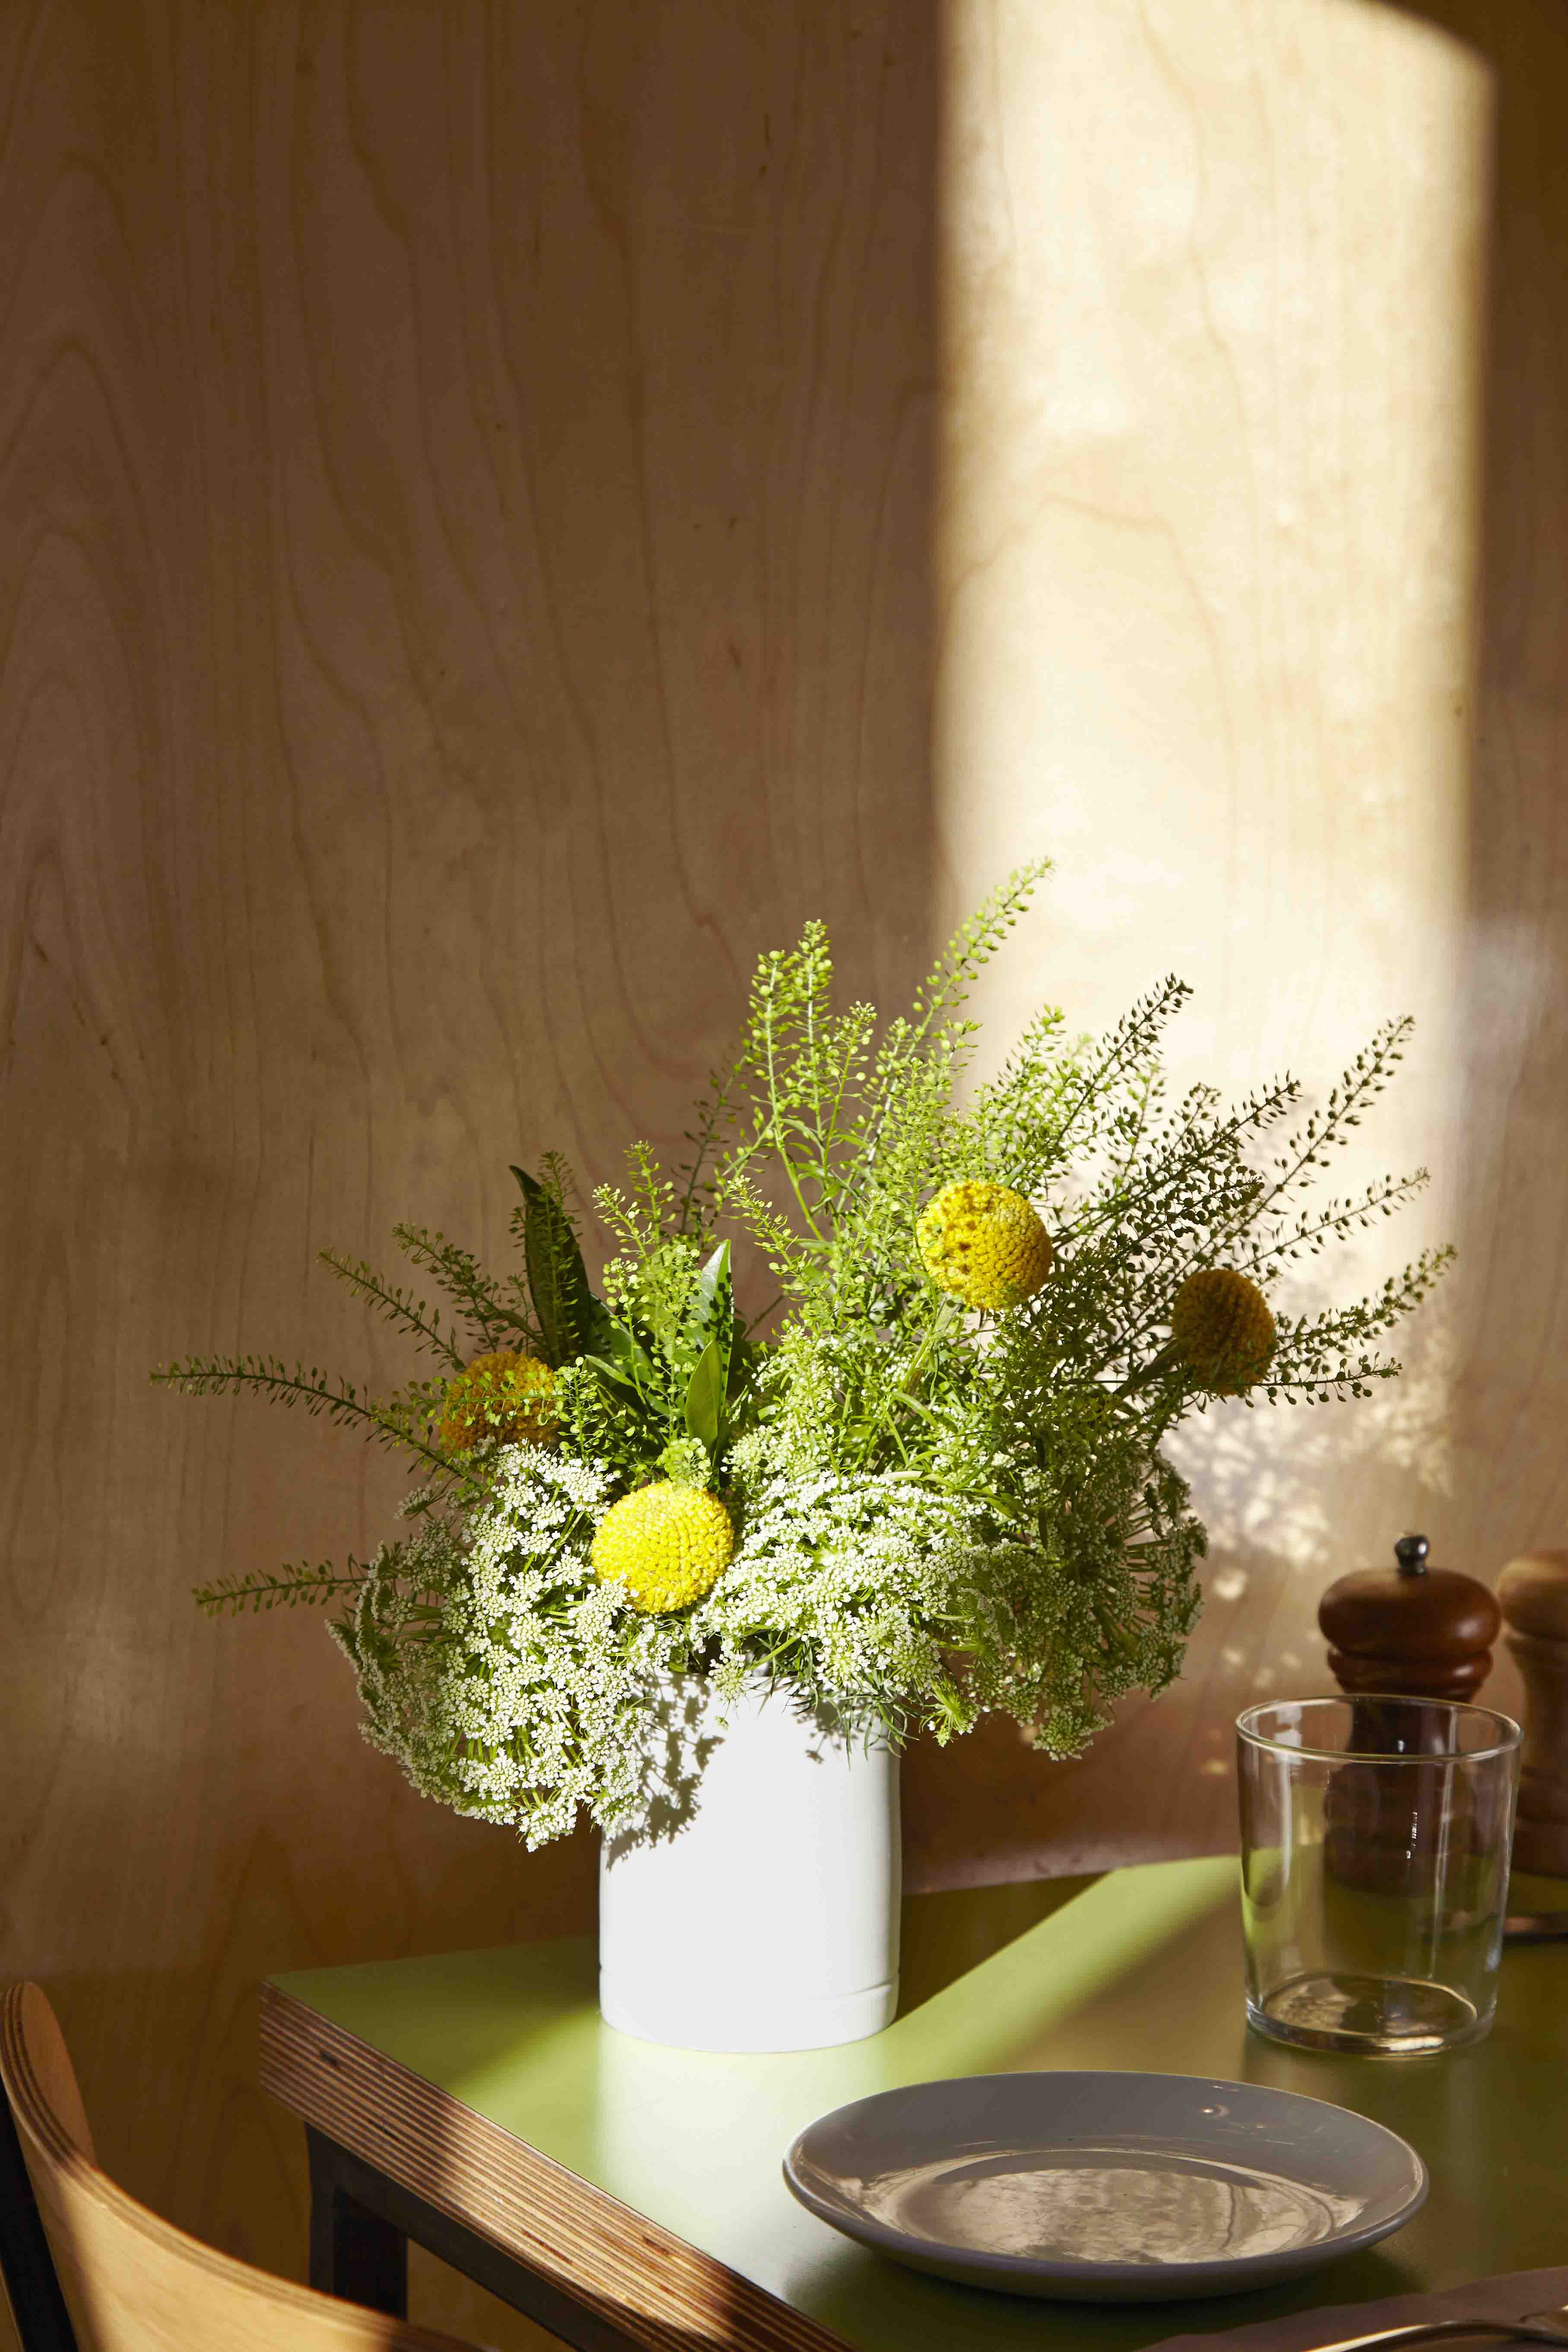 Wooden shelf with flowers in white vase on green table.